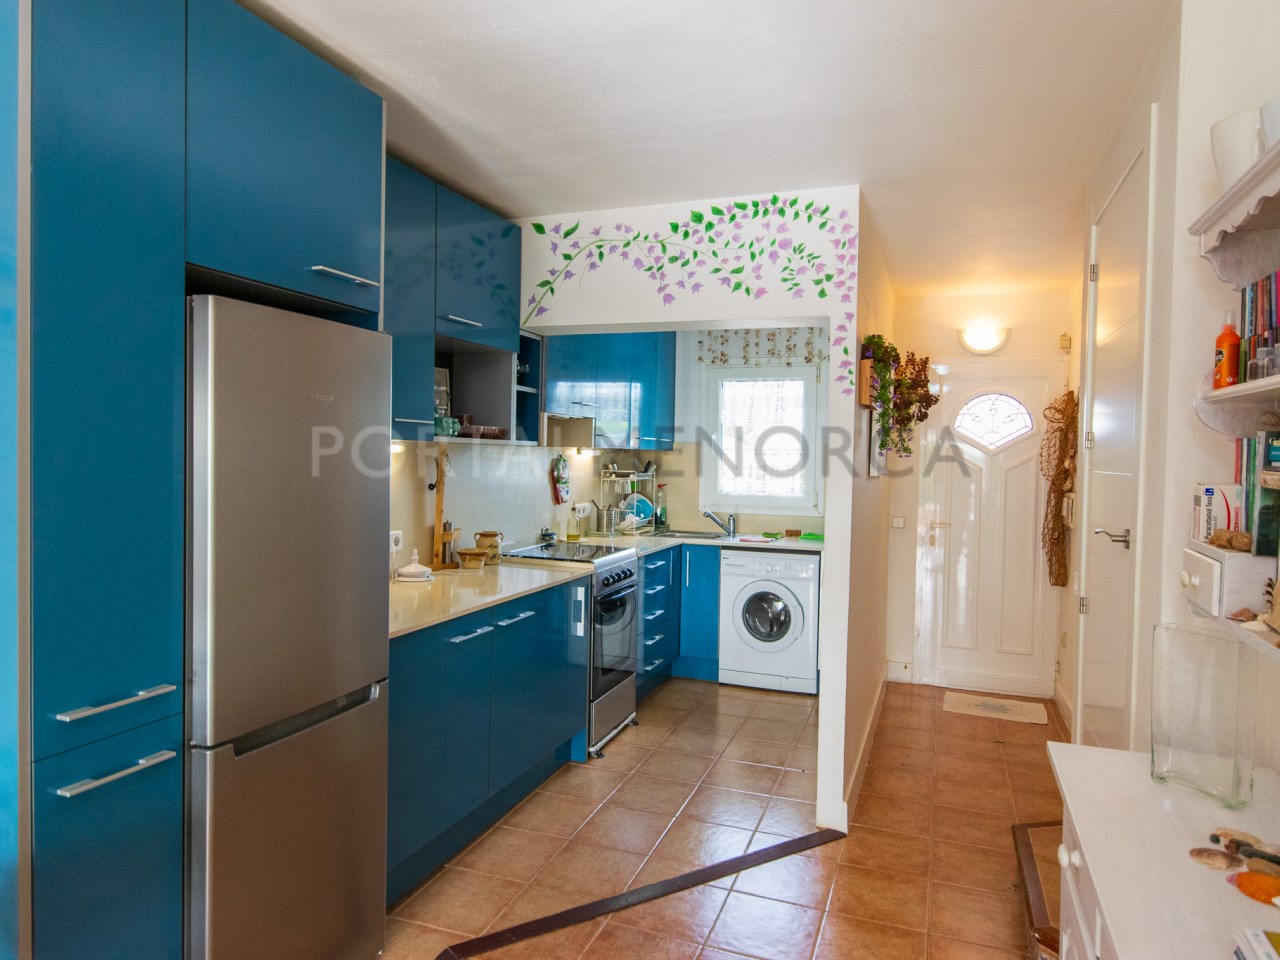 Kitchen of two bedroom townhouse for sale in Cales Coves